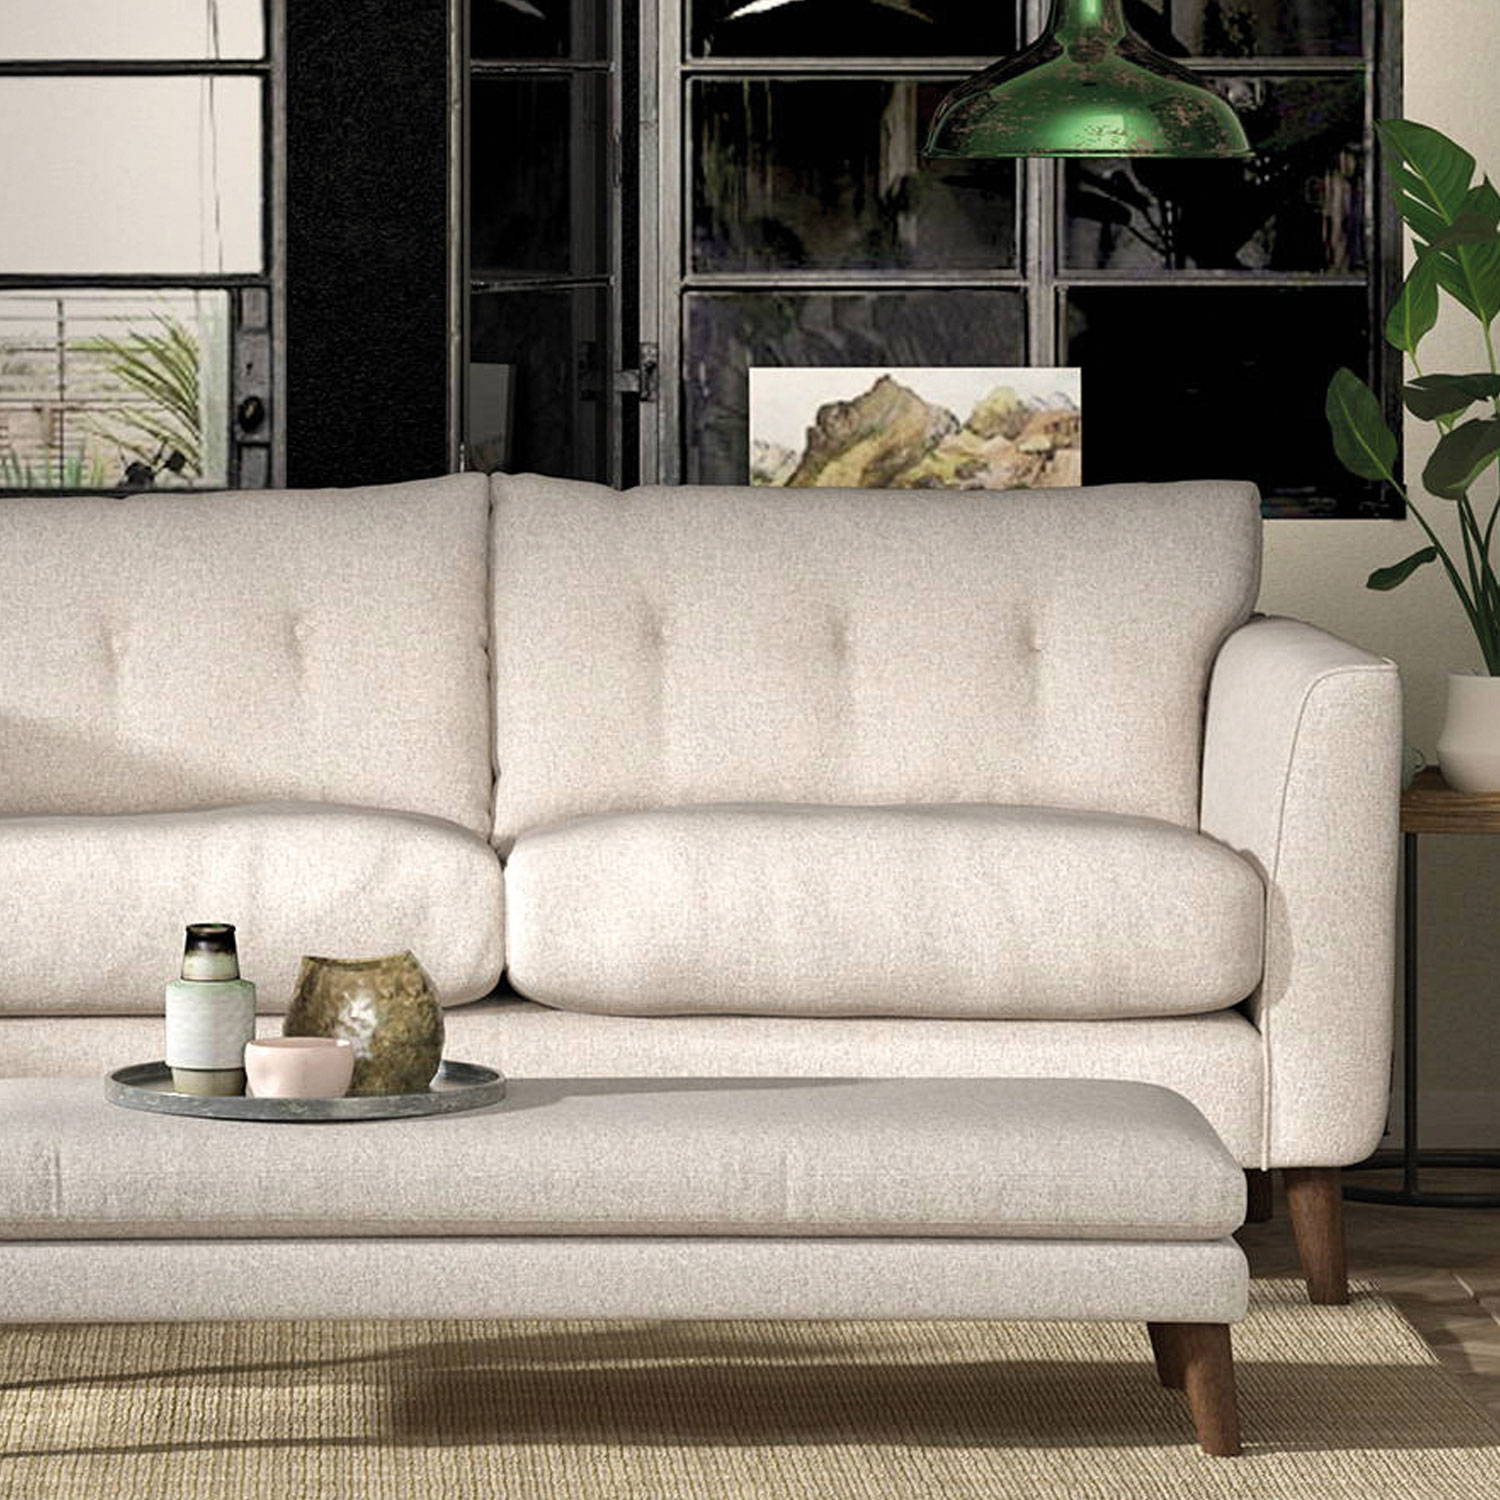 Our New Olive Sofa Collection